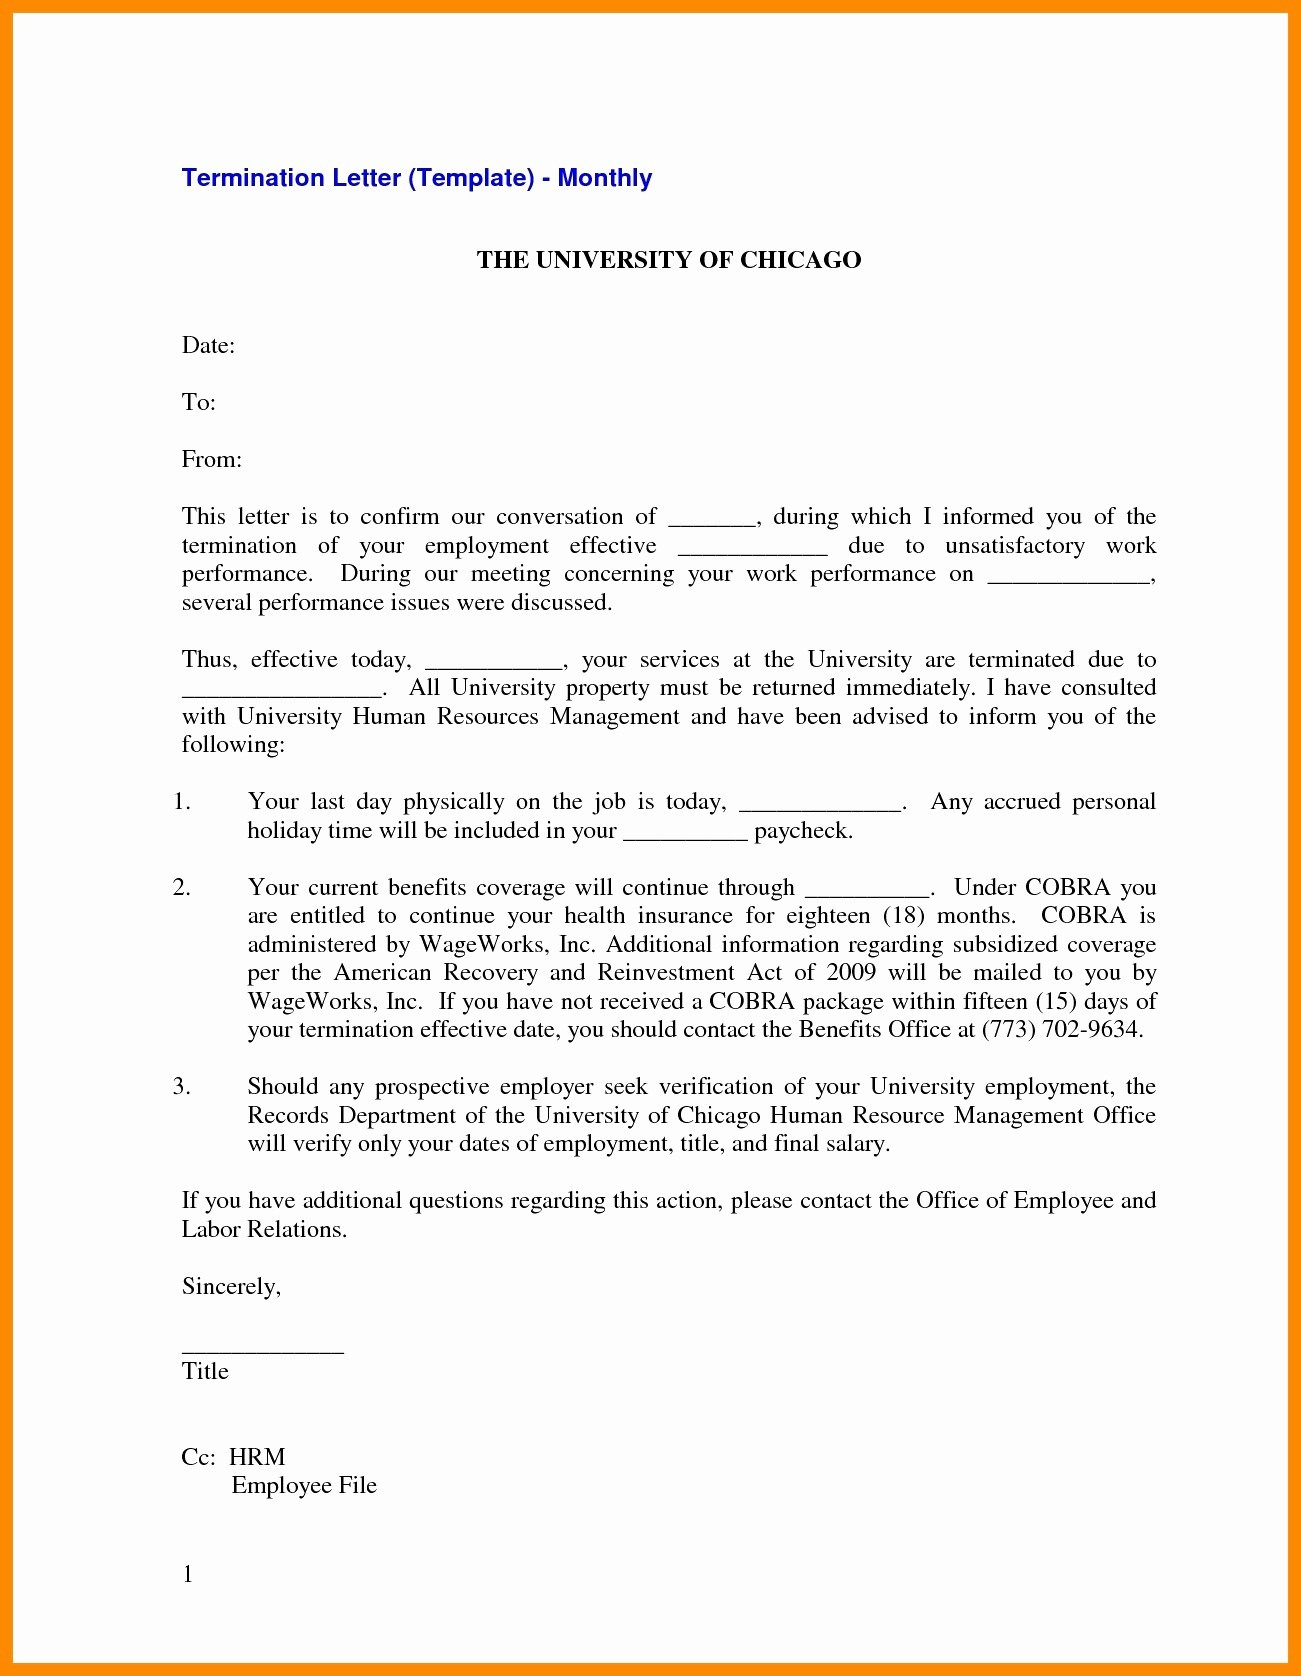 separation letter to employee template example-Certificate Separation From Employment Sample Philippines Best Sample Separation Letter for Marriage Beautiful Invitation 19-d